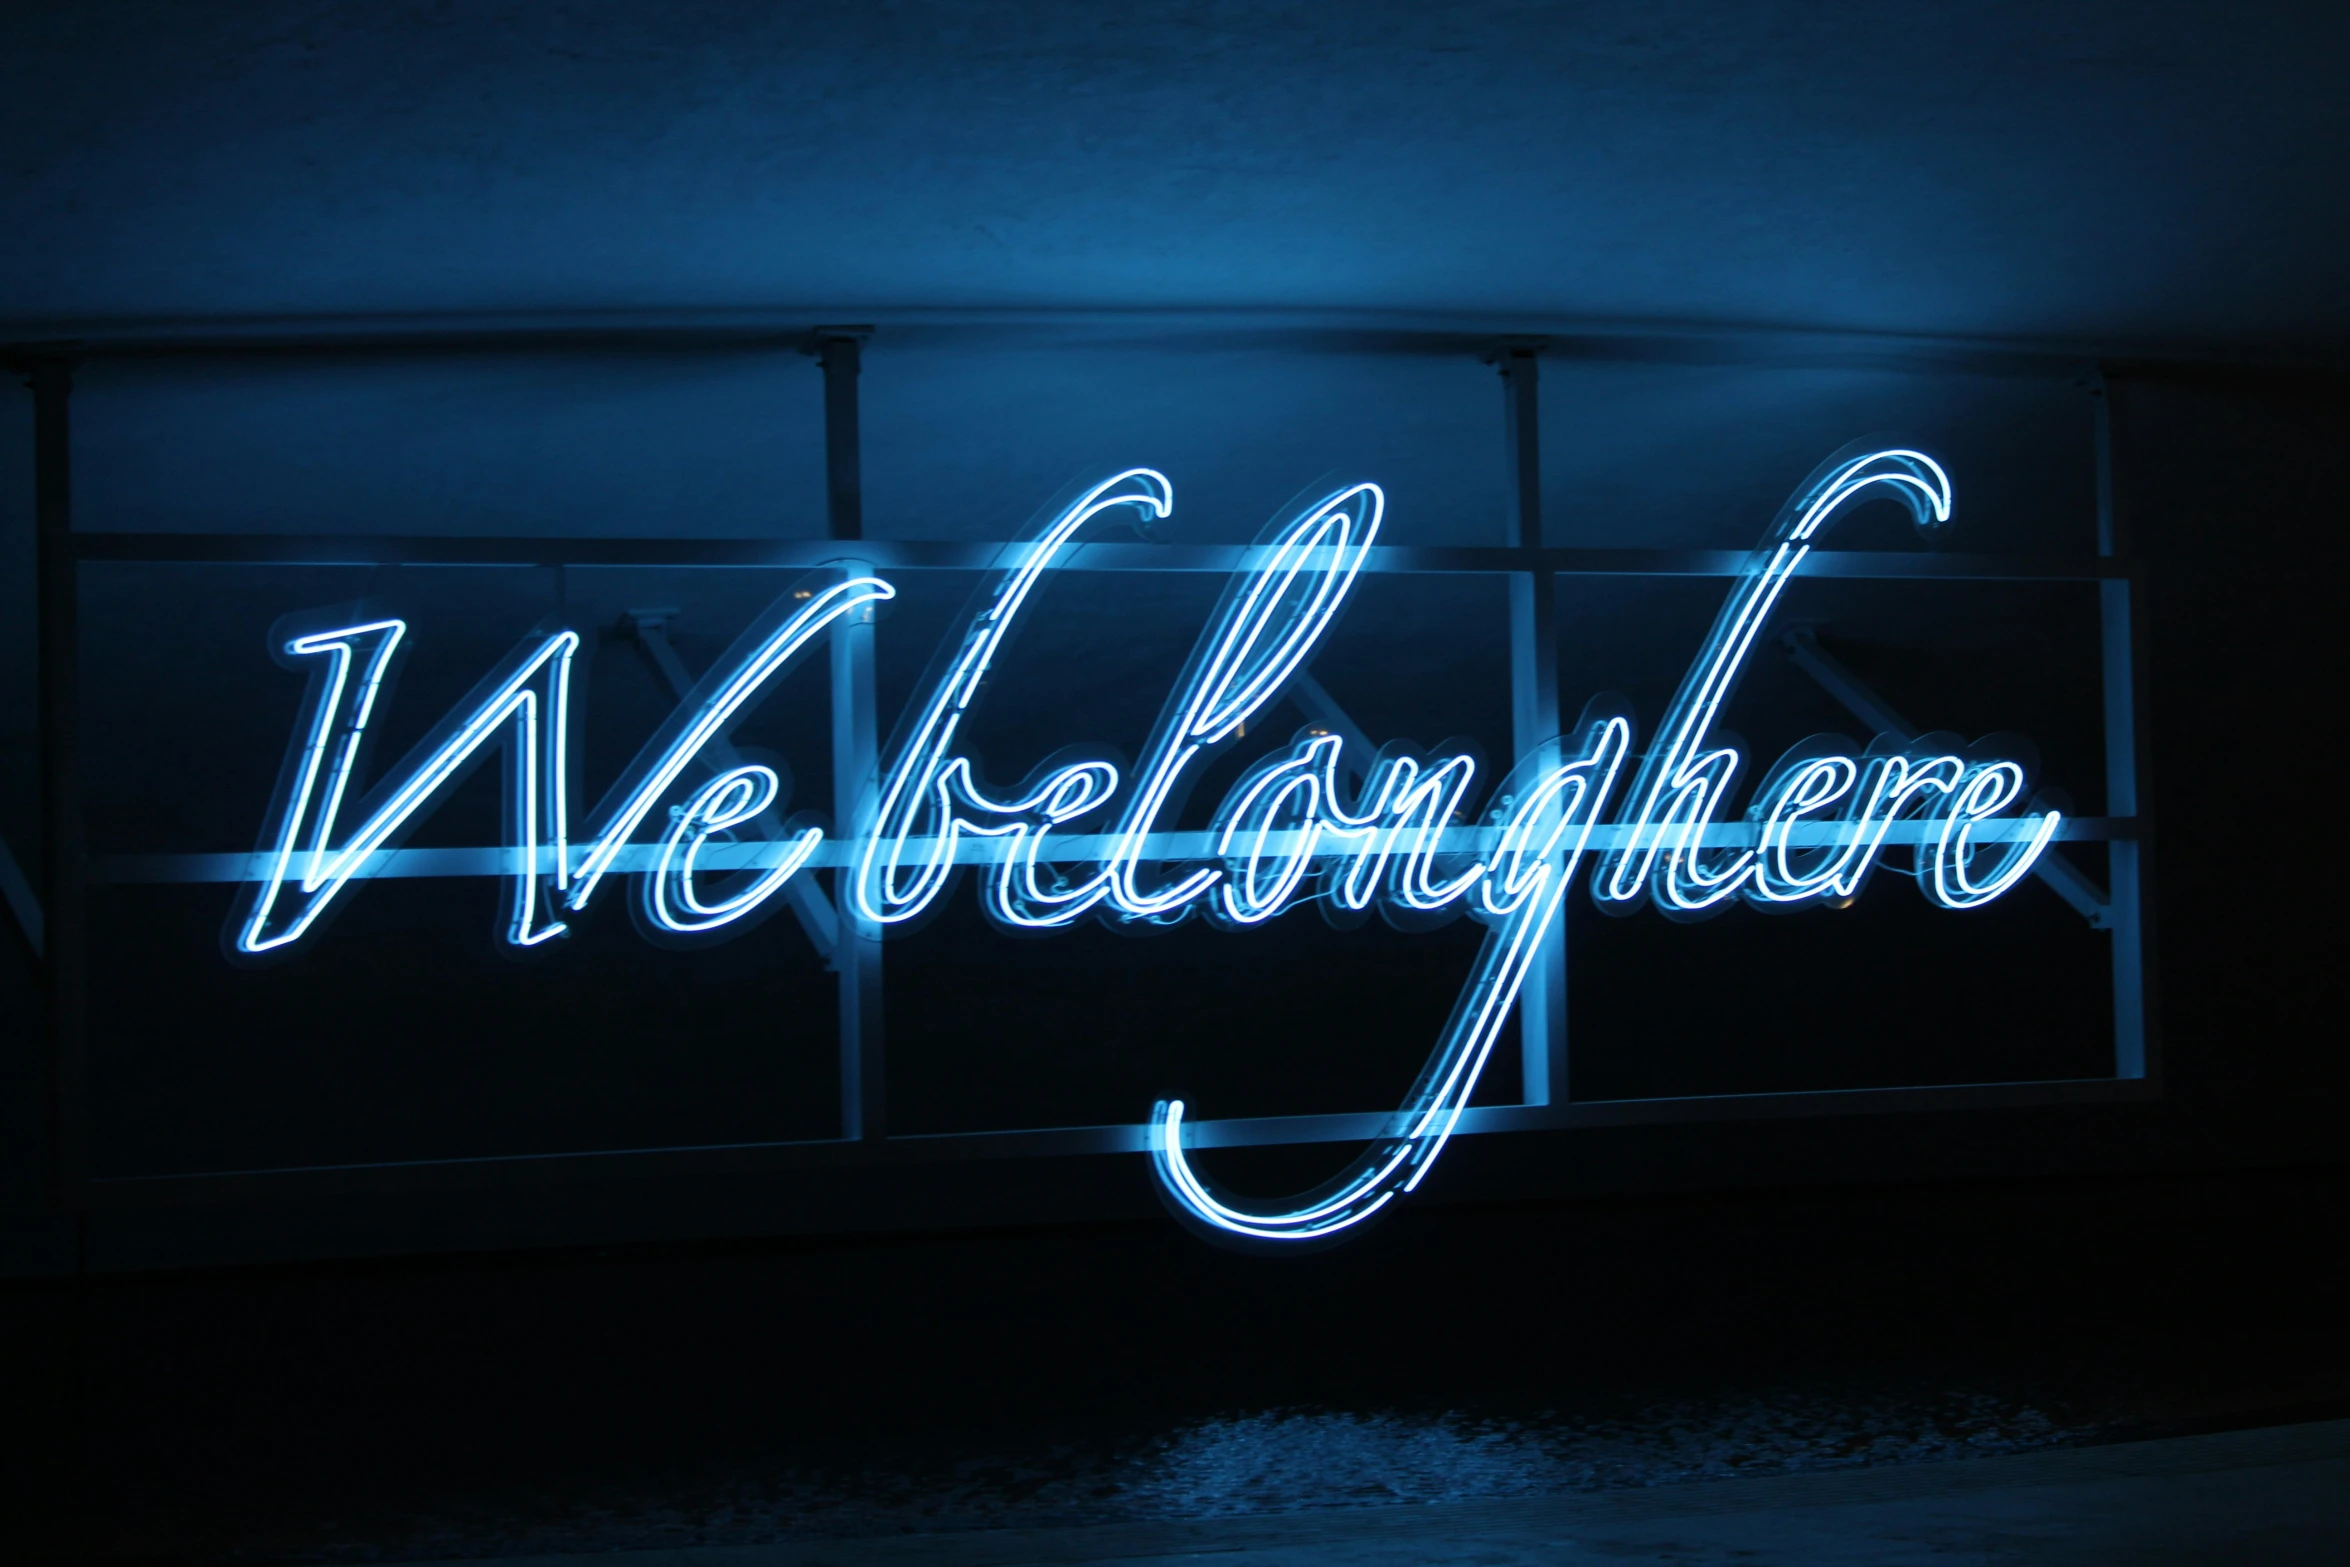 neon sign in blue lights with white writing on it